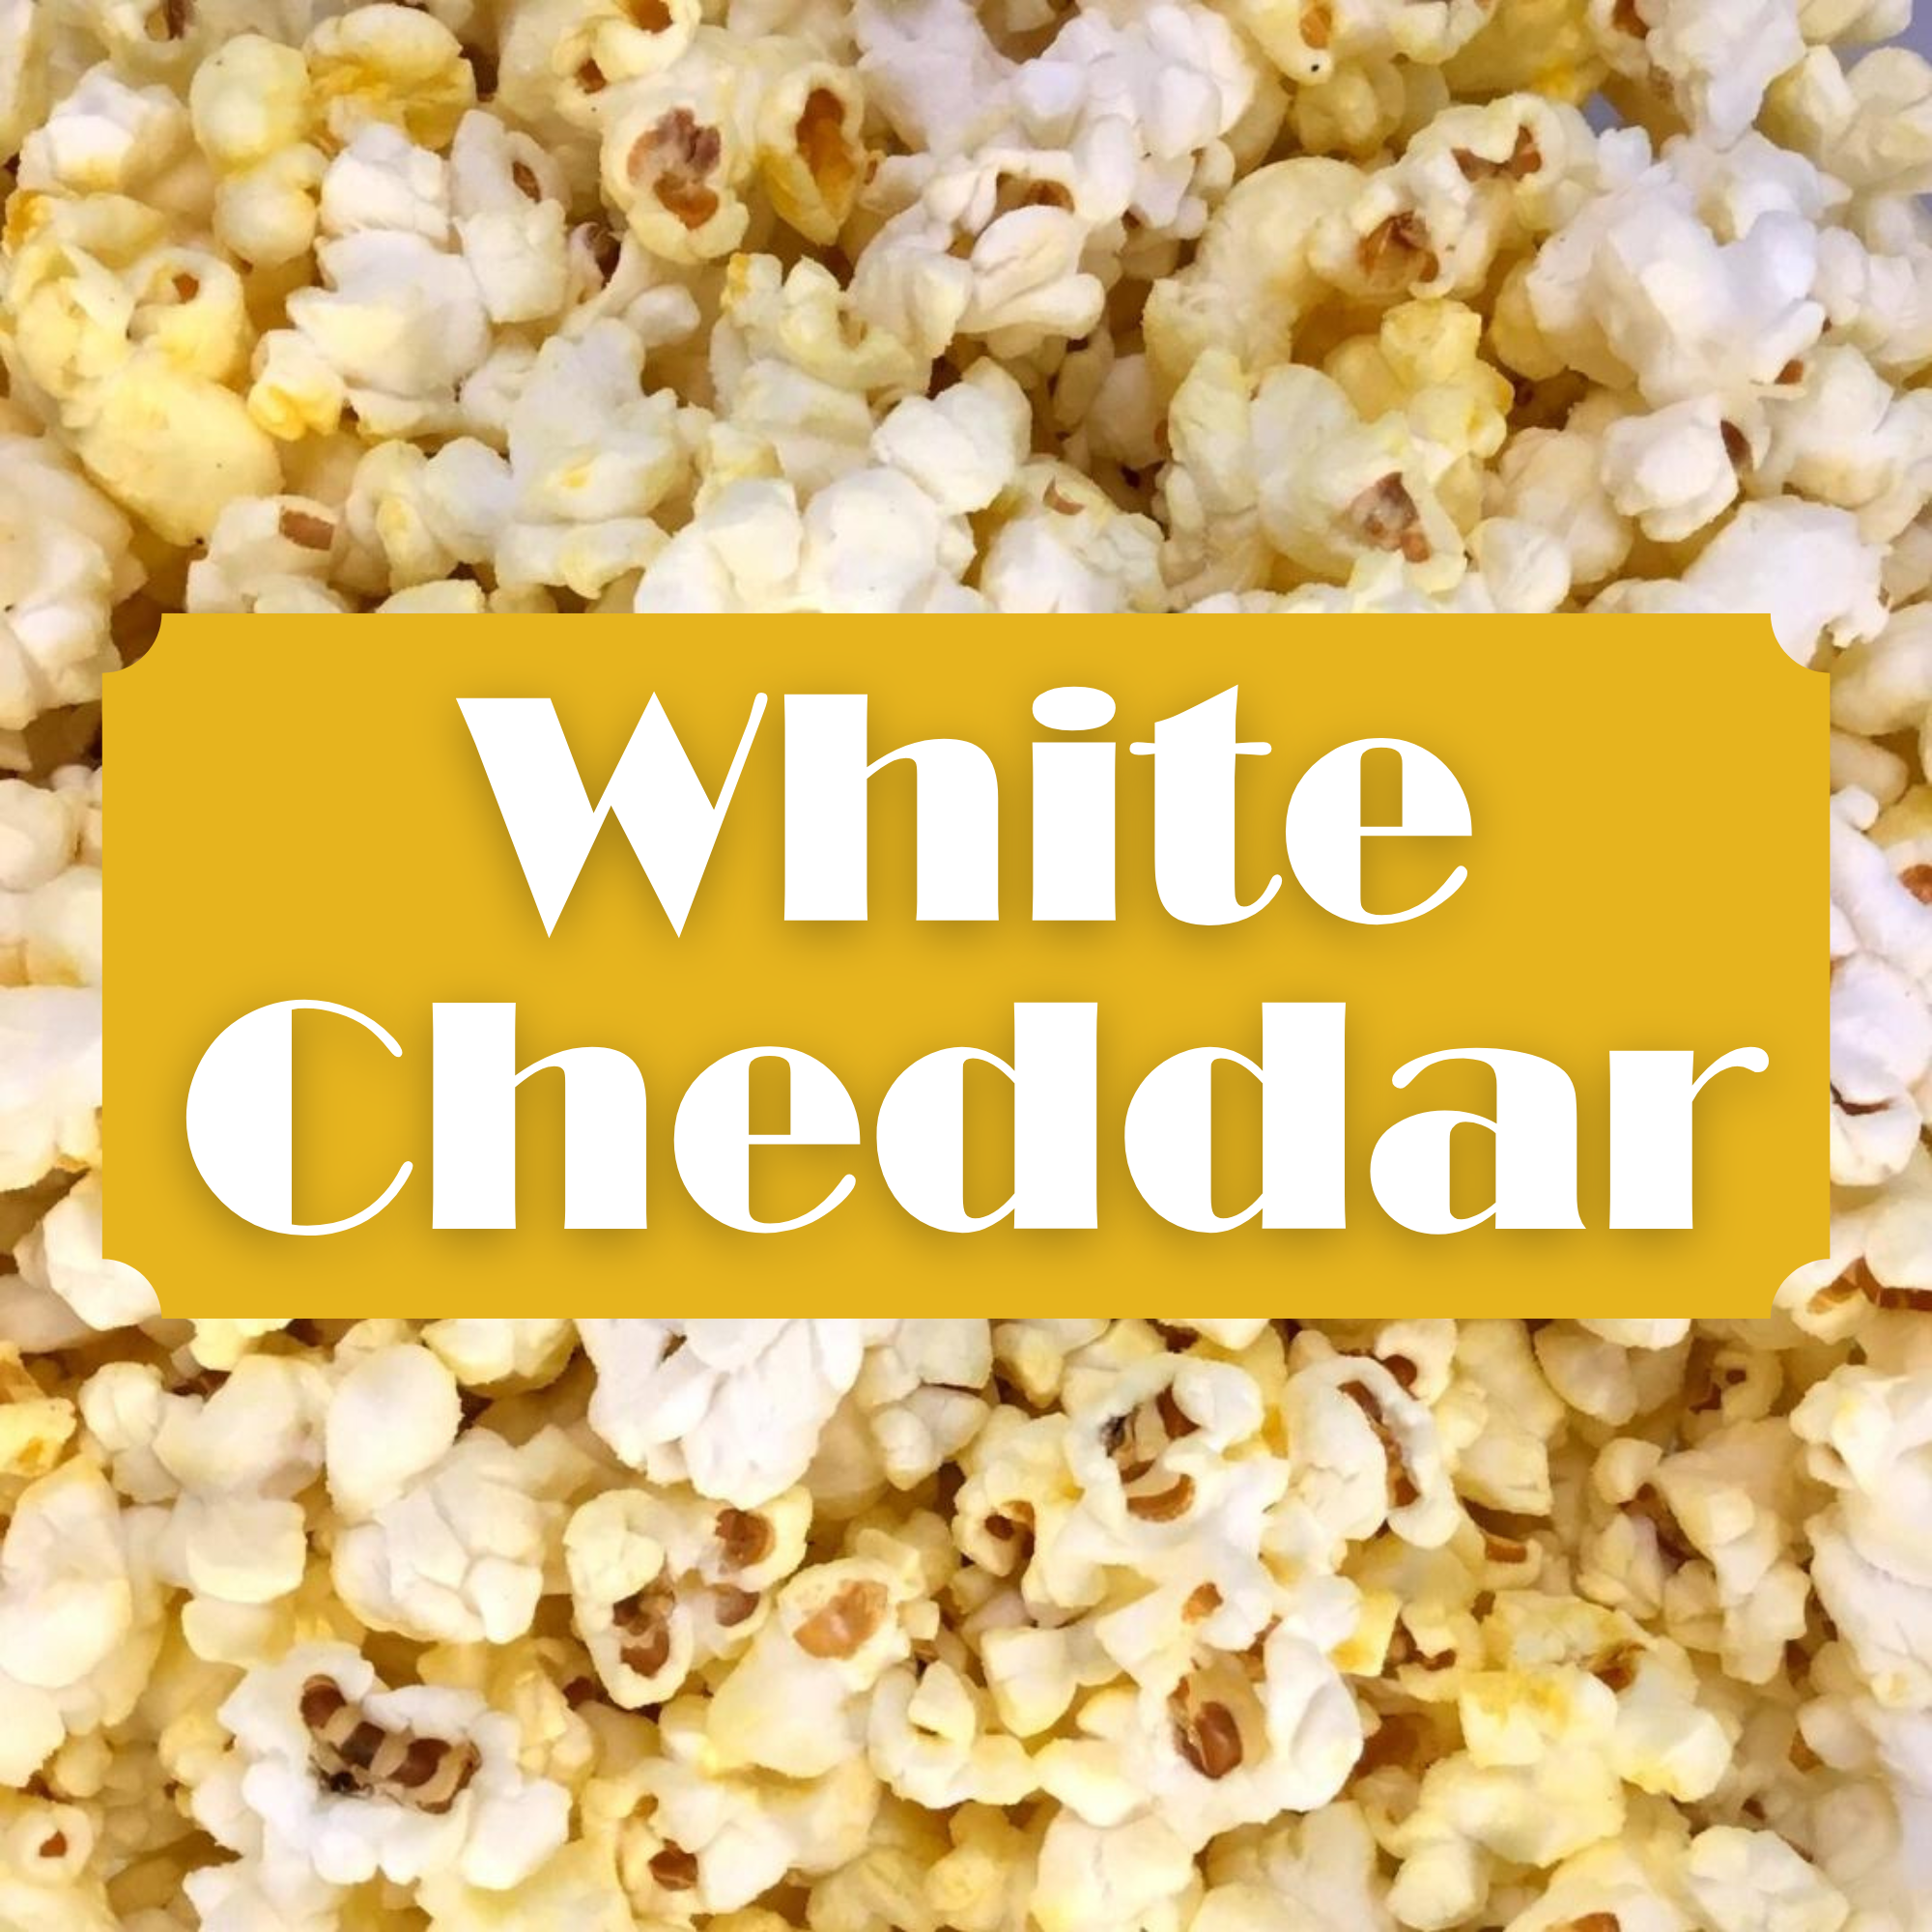 White Cheddar Popcorn Small Bags - Case of 16 (2.39ea)